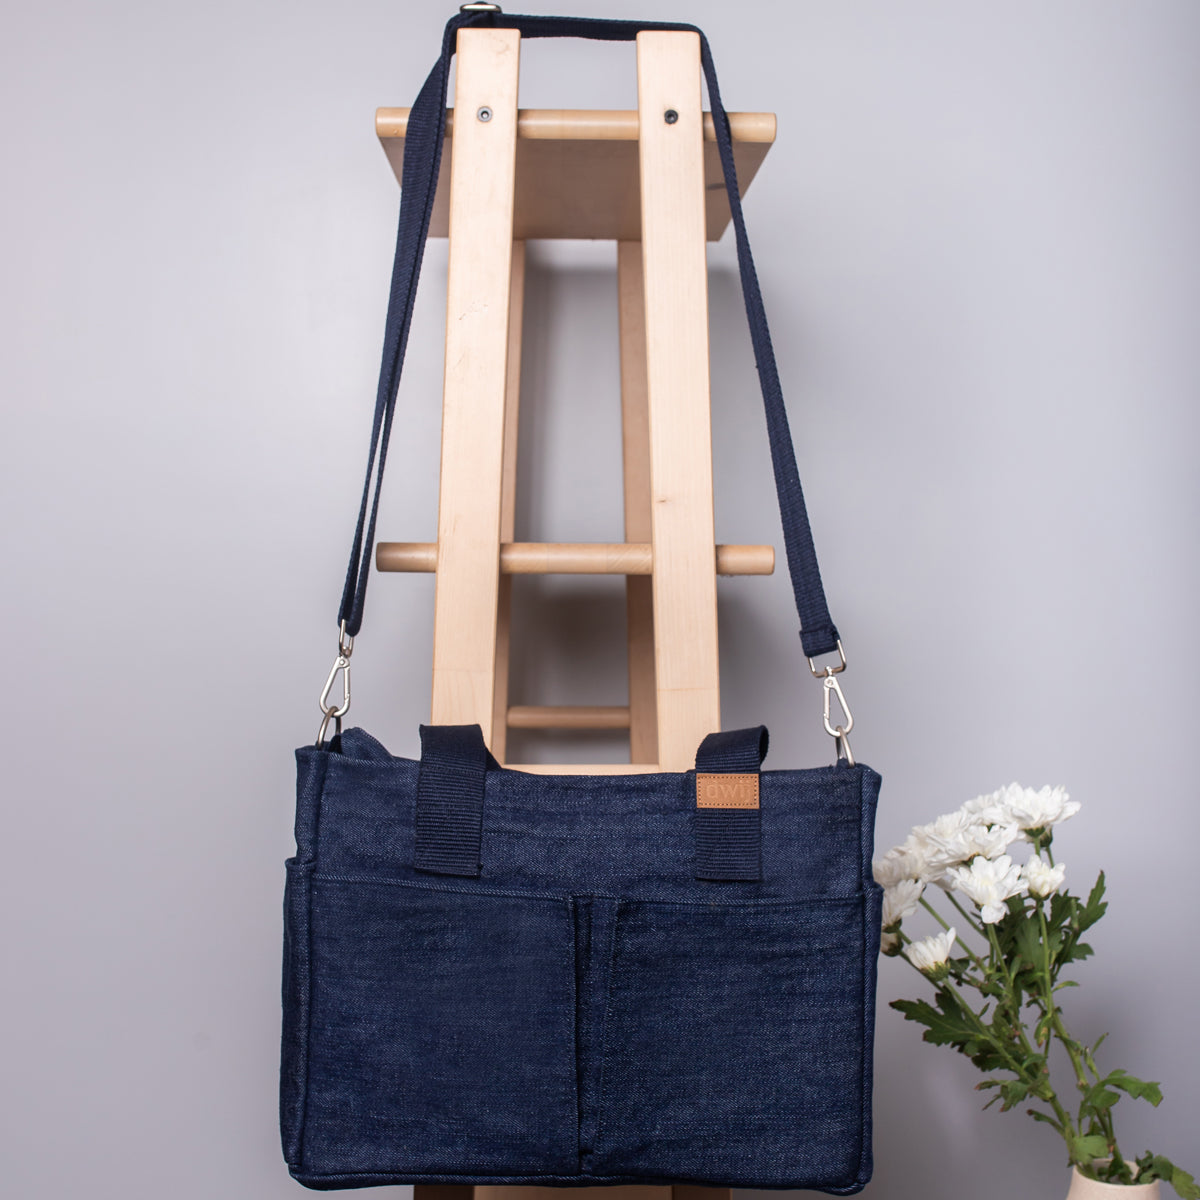 Upcycled Denim Dual Usage Tote Bag with removable insert